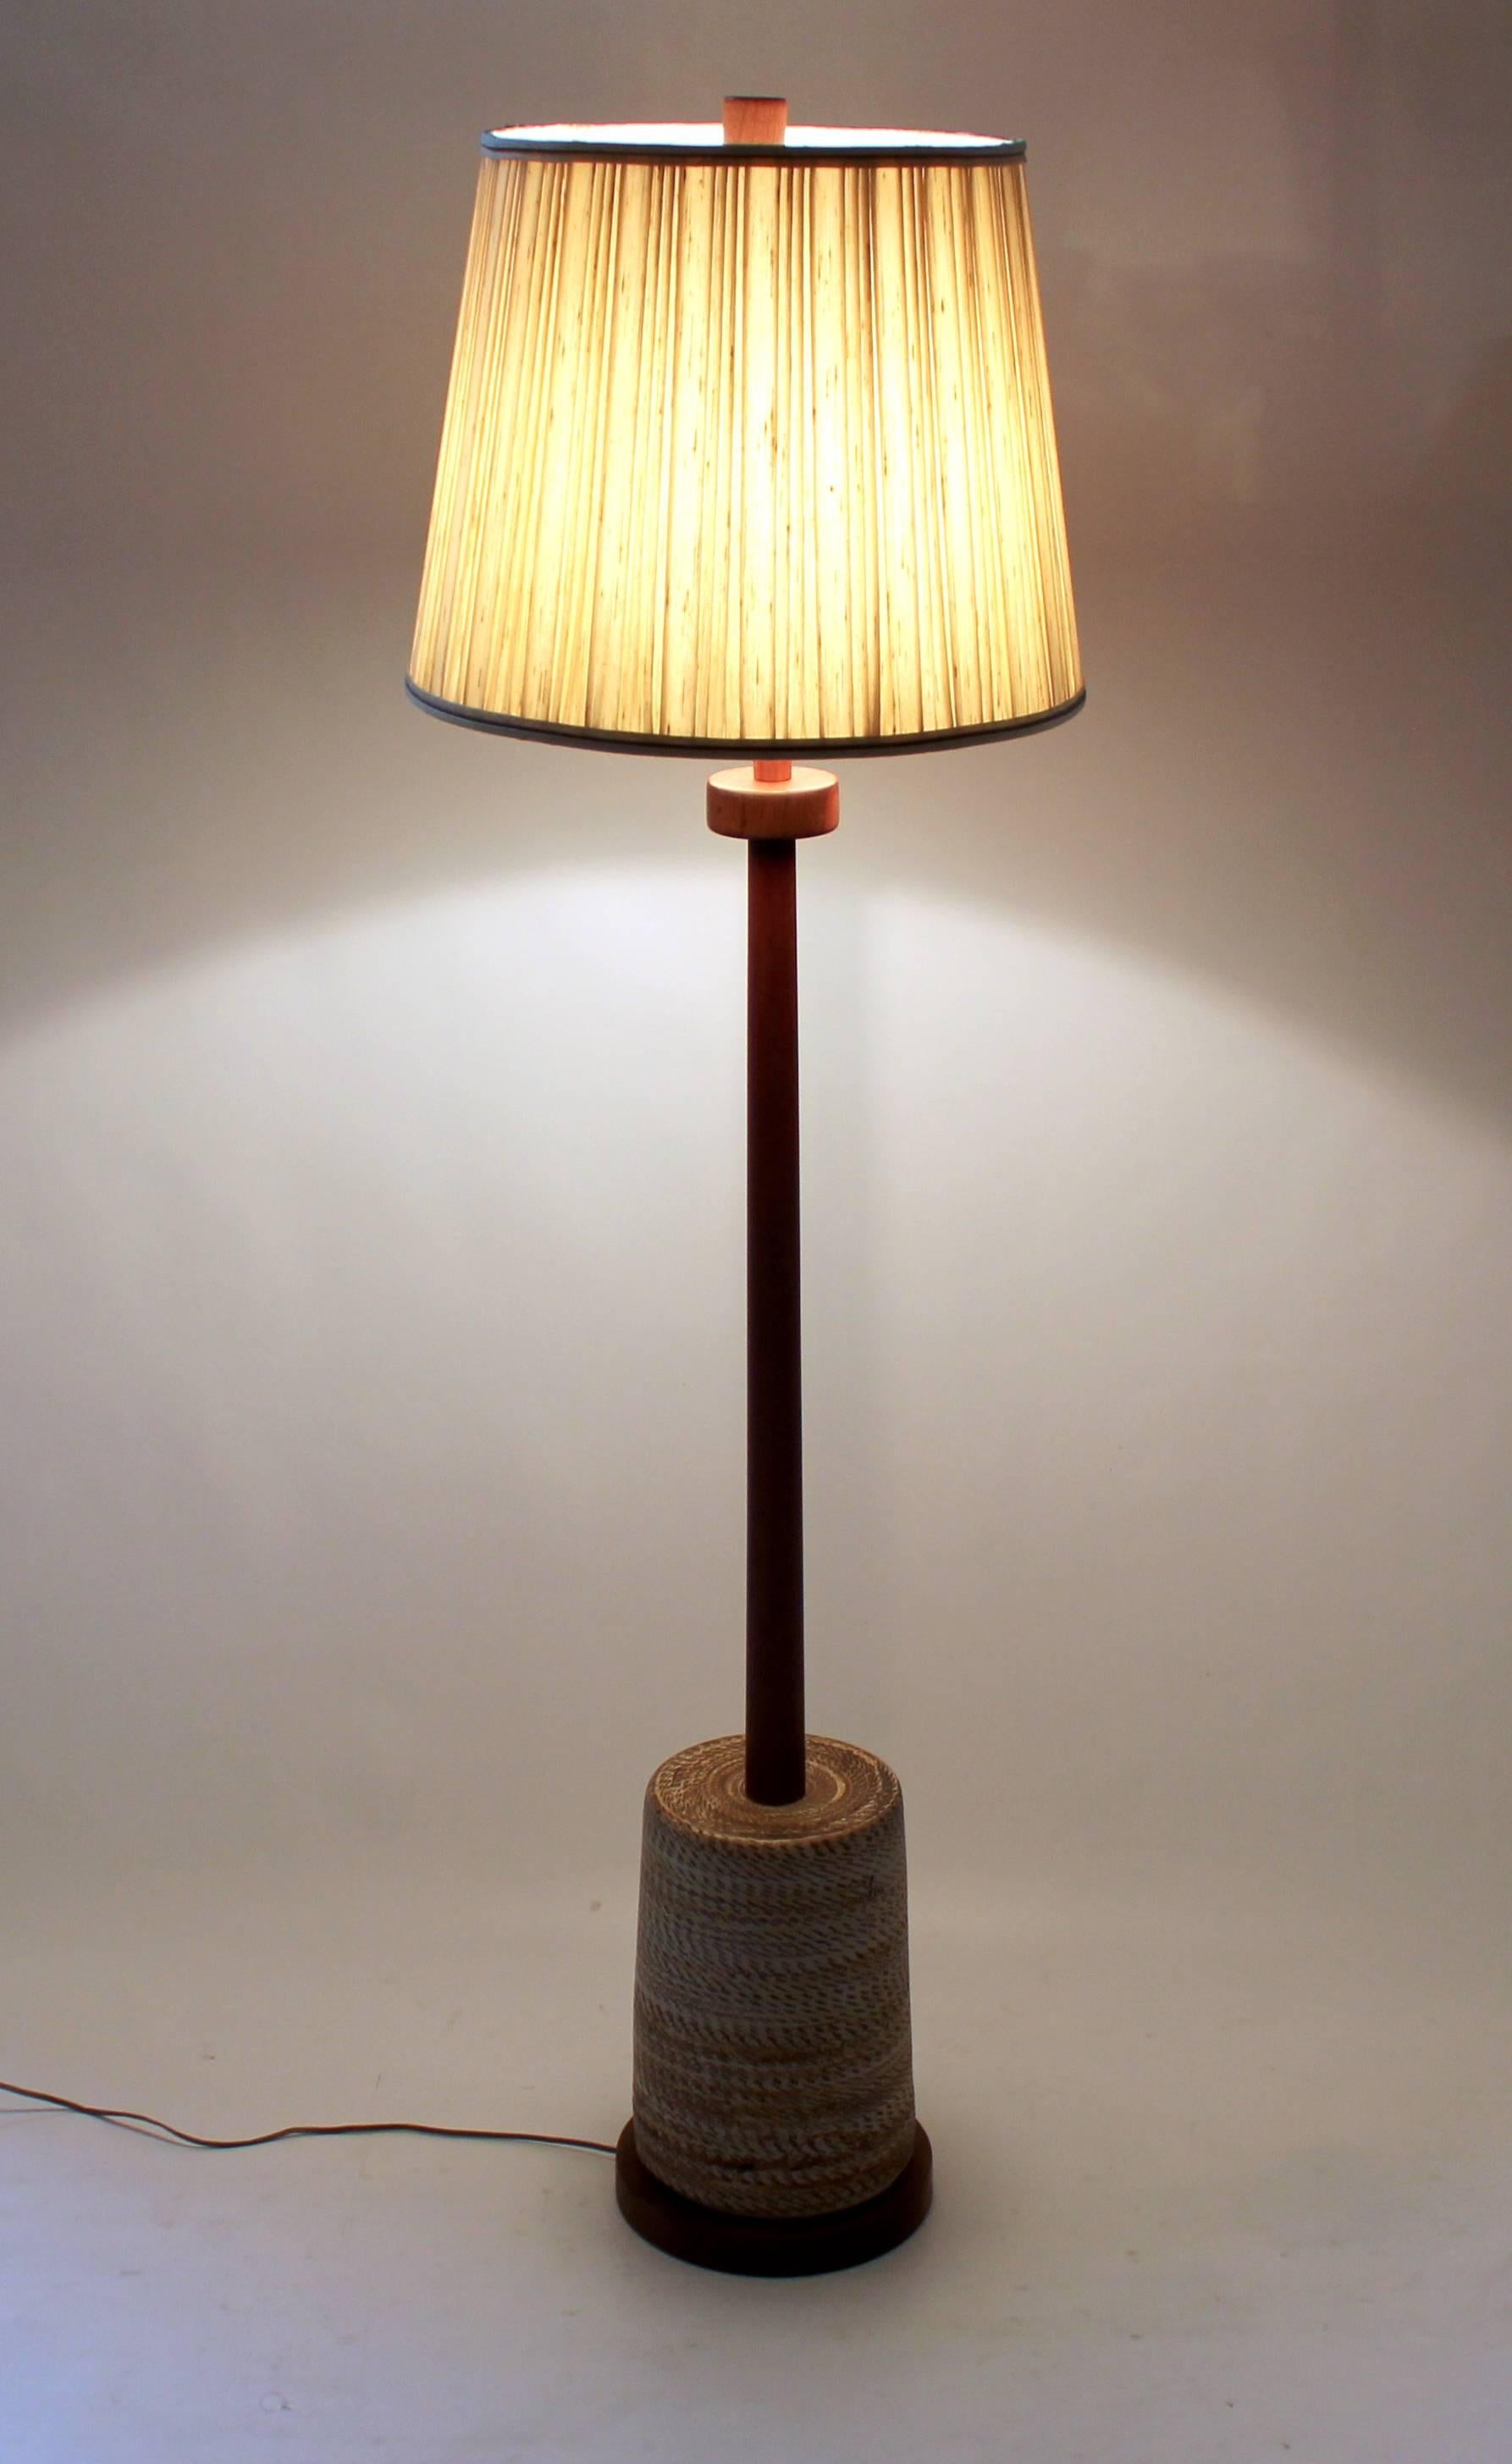 1960s ceramic and walnut floor lamp by Gordon and Jane Martz for Marshall Studios. Shade measures 17